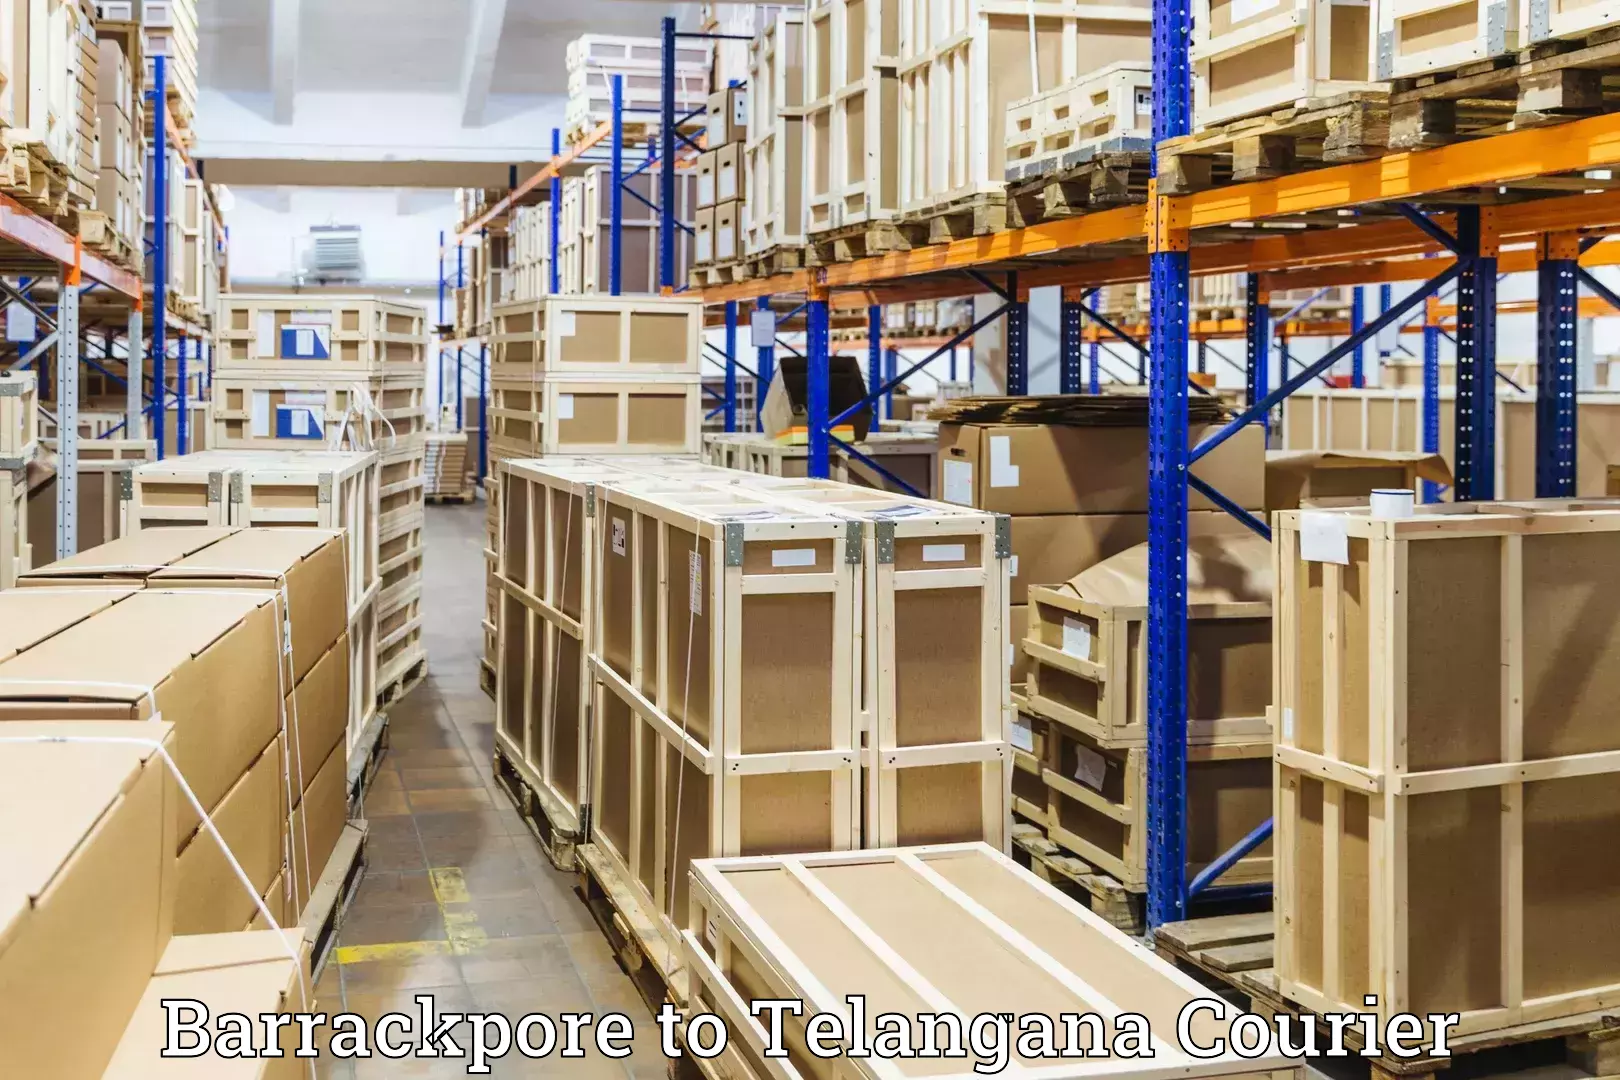 Luggage shipment specialists Barrackpore to Makthal